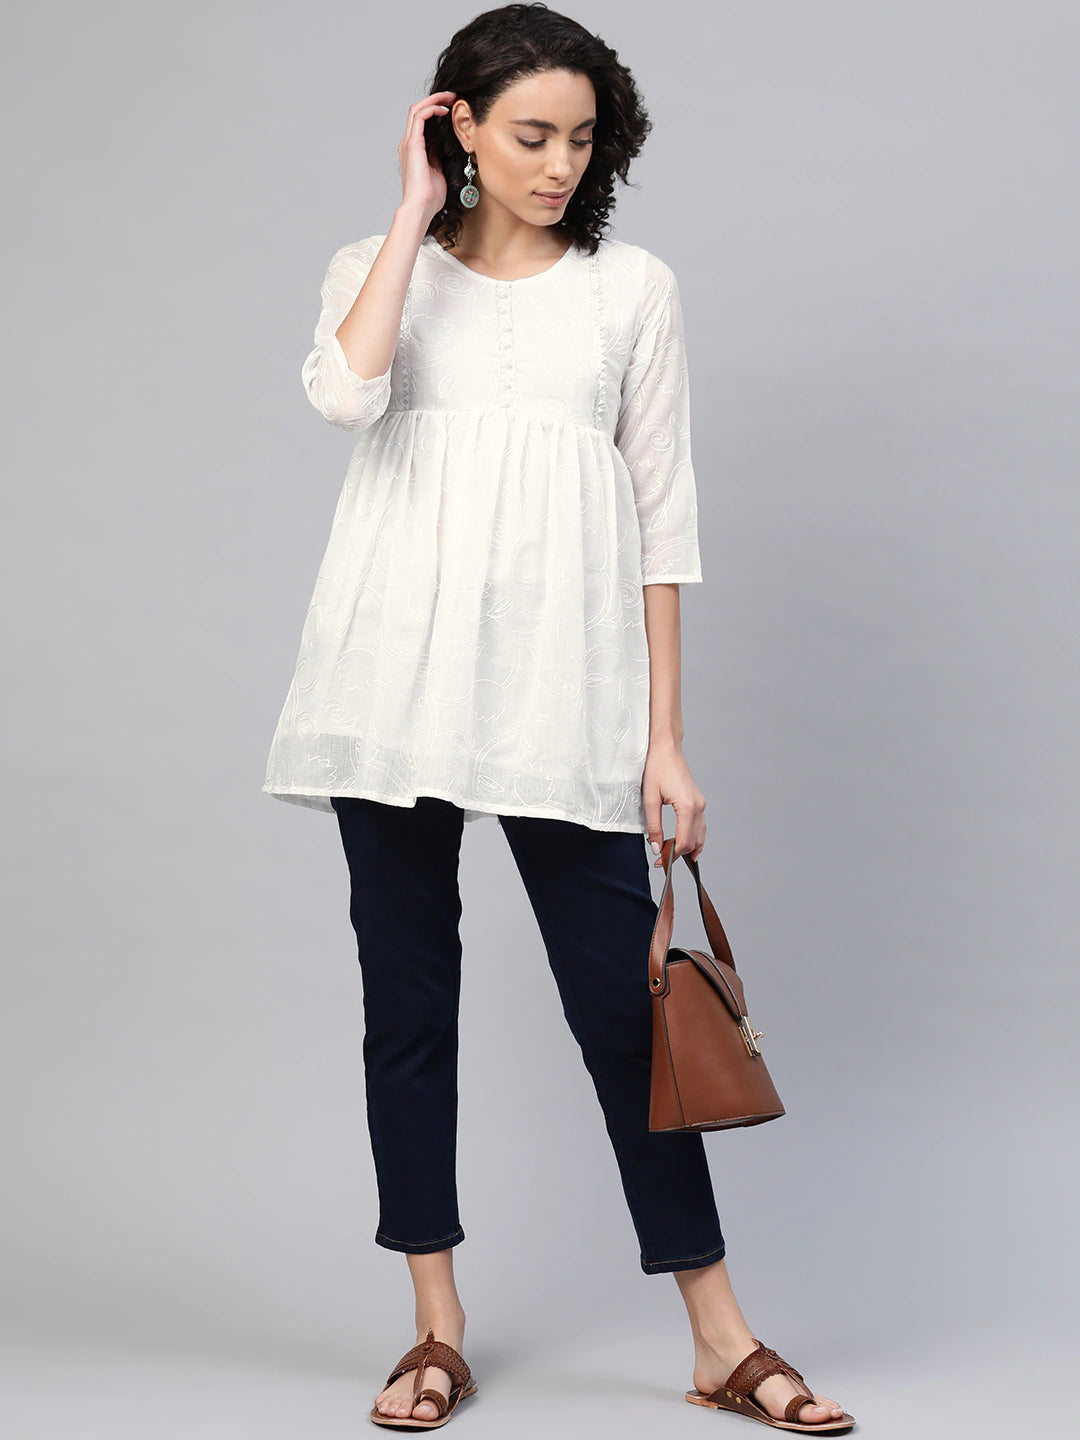 Women's Off-White Cotton Tunic By Ahalyaa (1Pc)